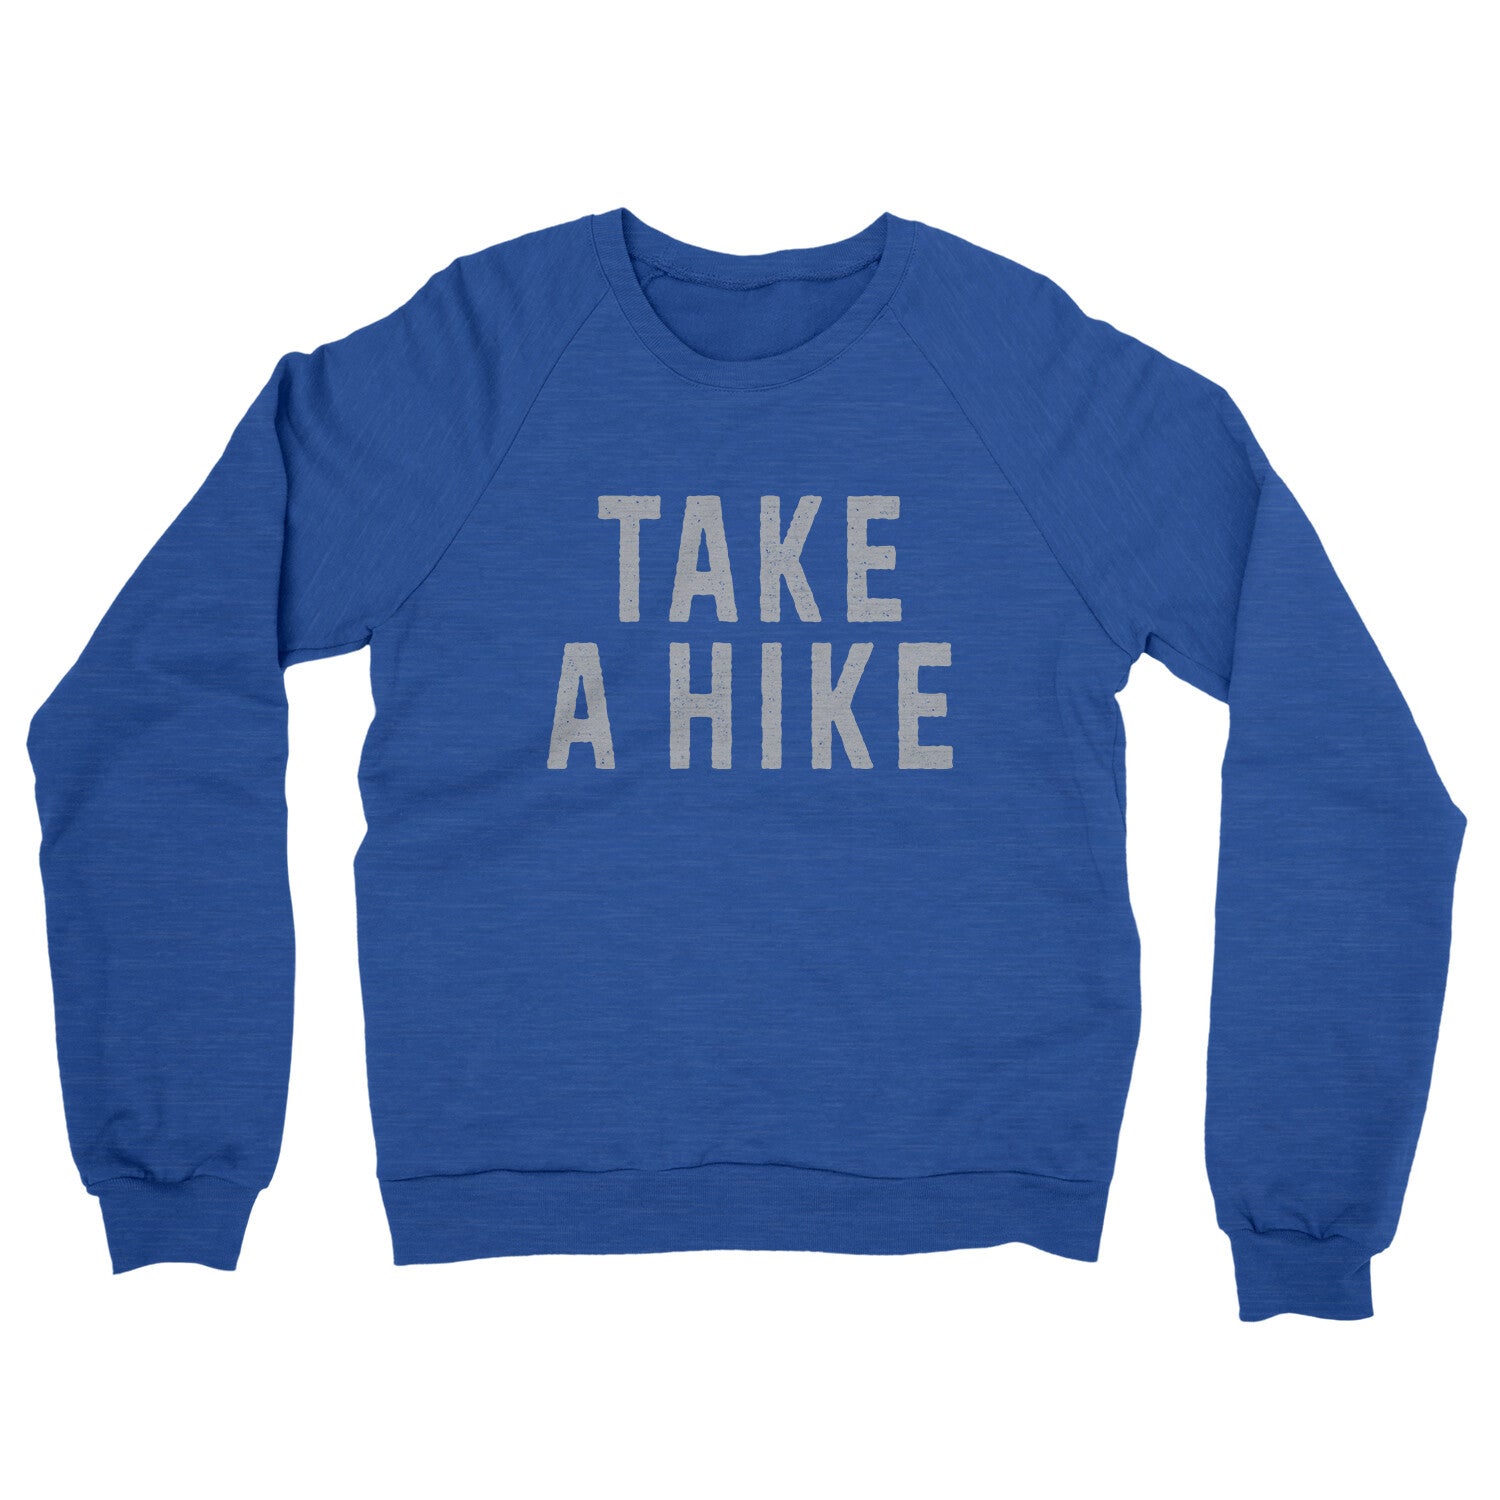 Take a Hike in Heather Royal Color